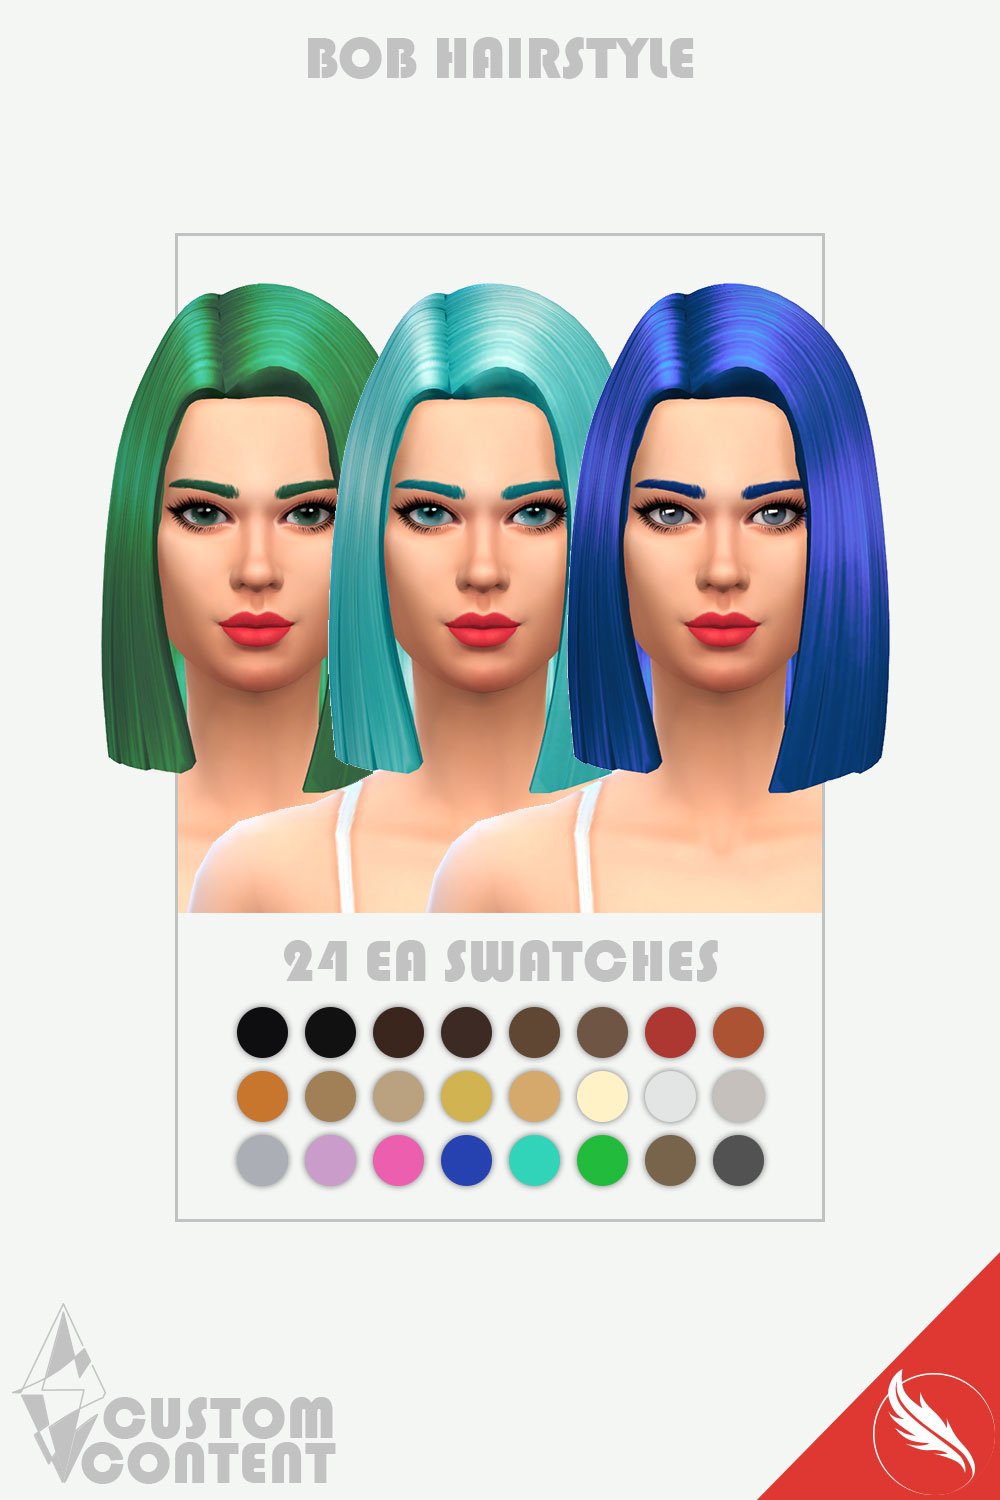 The Sims 4 Bob Hairstyle Custom Content